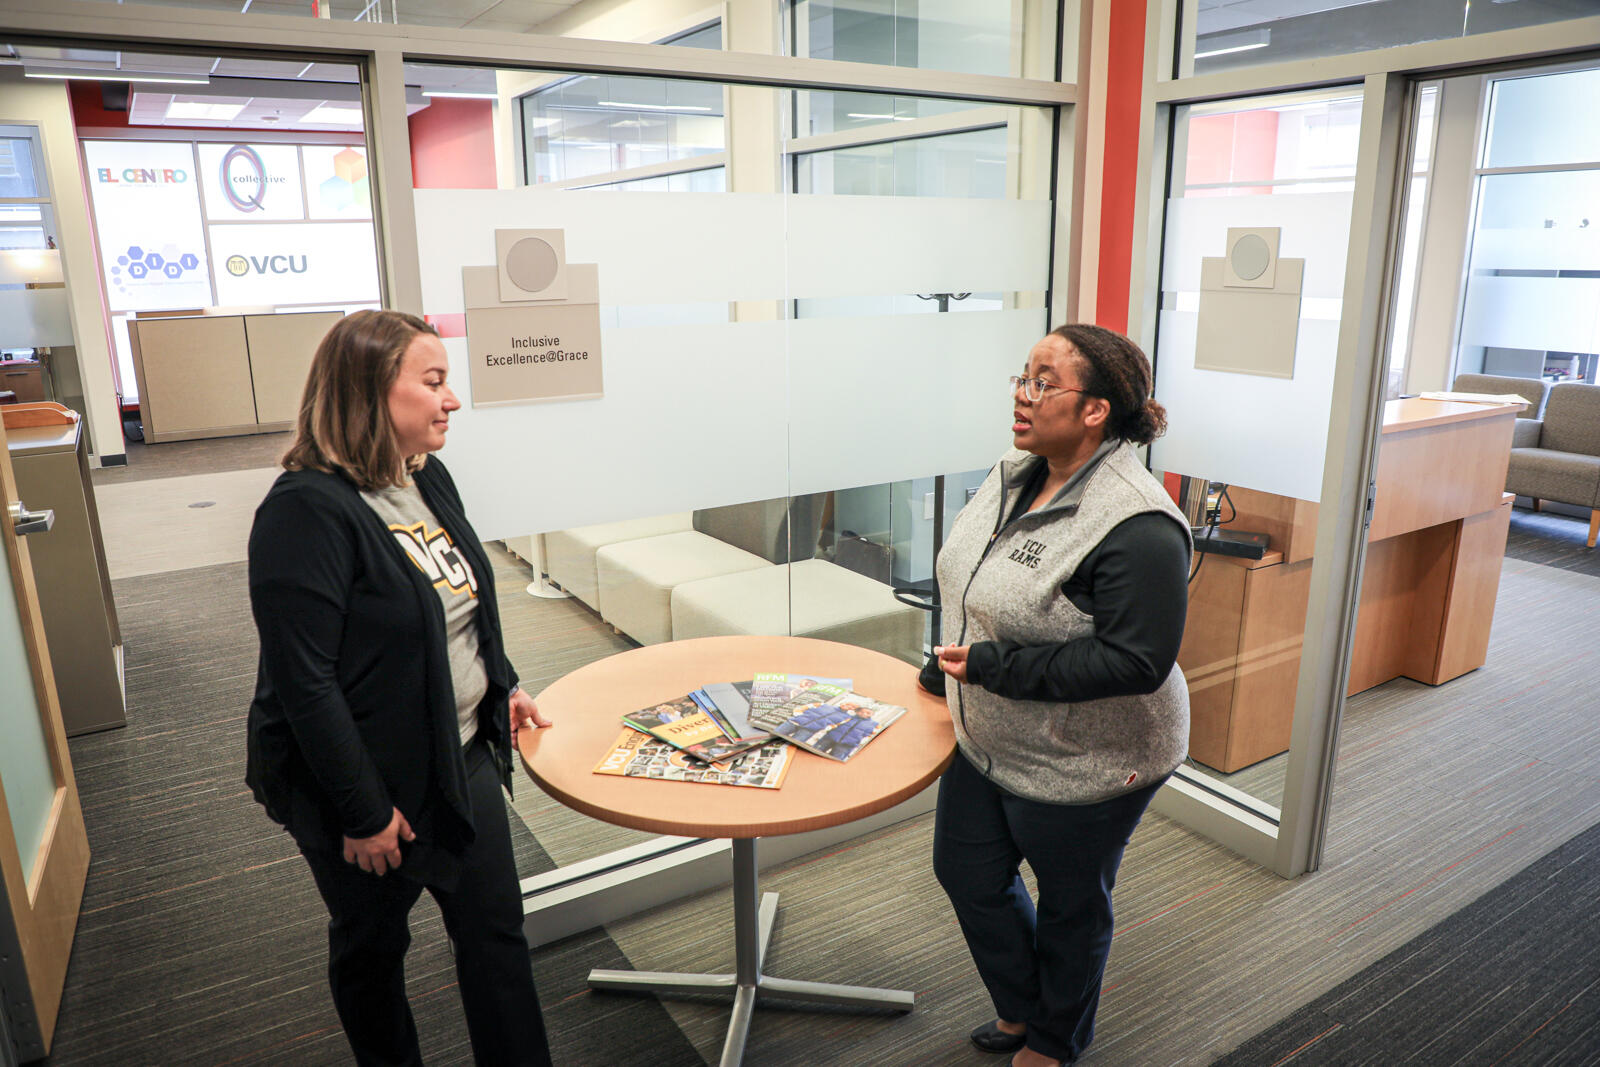 Malorie Yeaman, Title IX coordinator and director of outreach and support at VCU, speaks with Cleopatra Magwaro, associate vice president of institutional equity and interim Americans with Disabilities Act coordinator. They are standing and talking to each other across a small table.